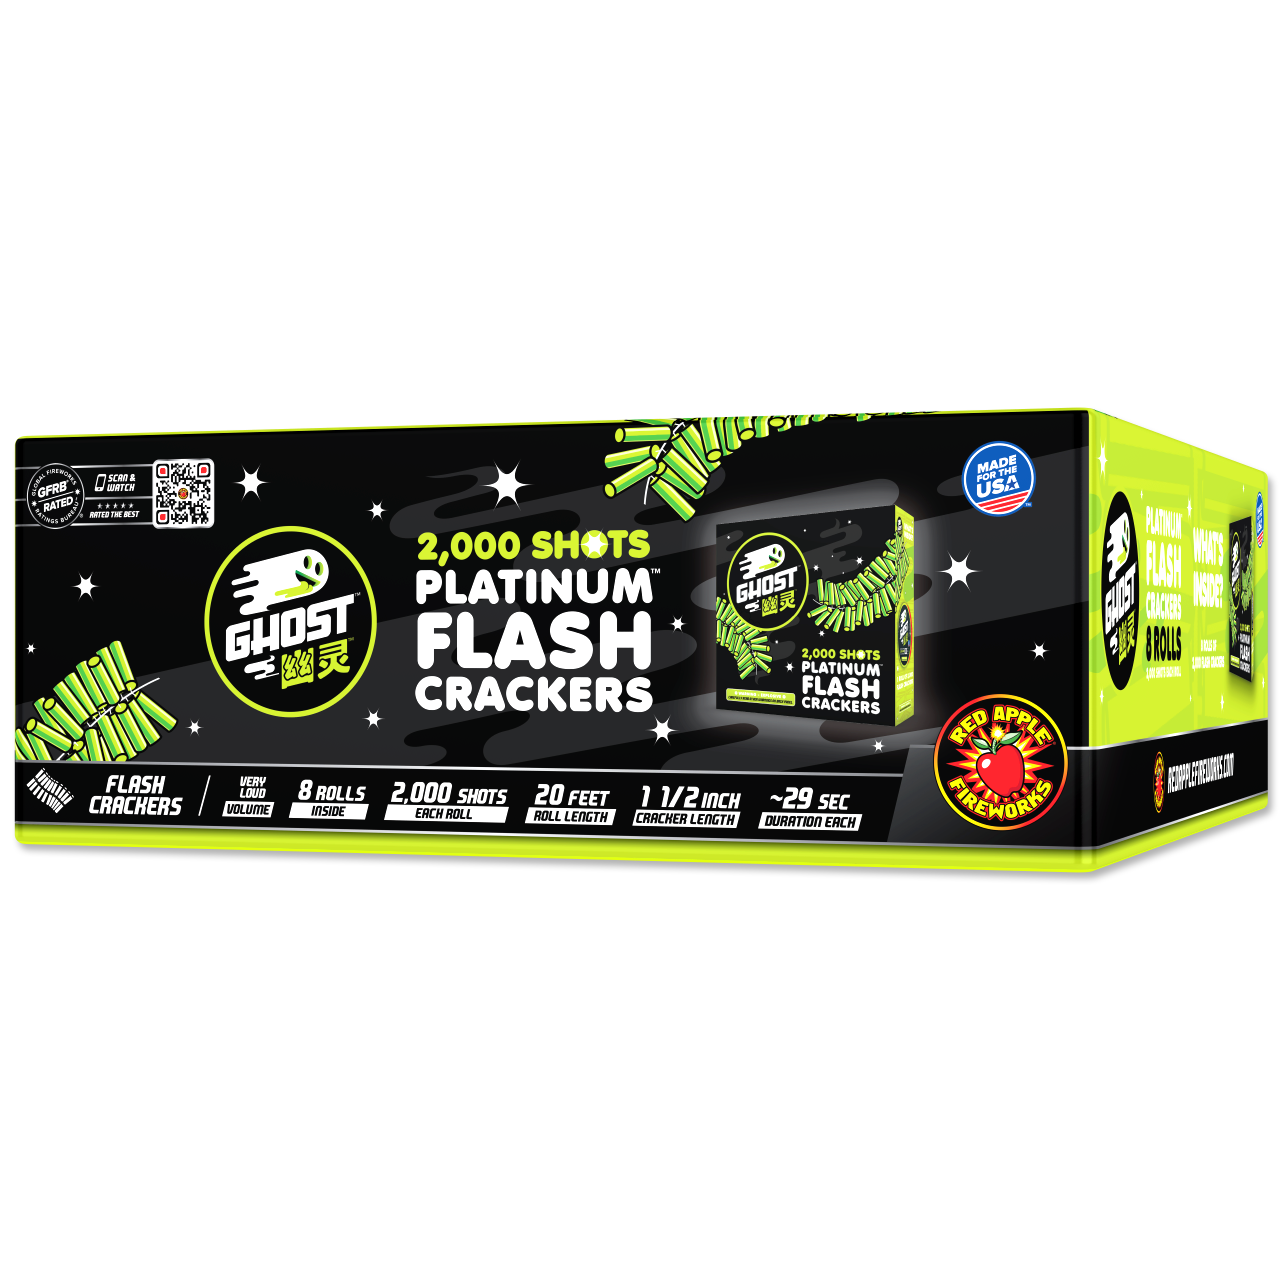 Flash Paper (Pack of 4)  Canada's #1 Online Fireworks Store